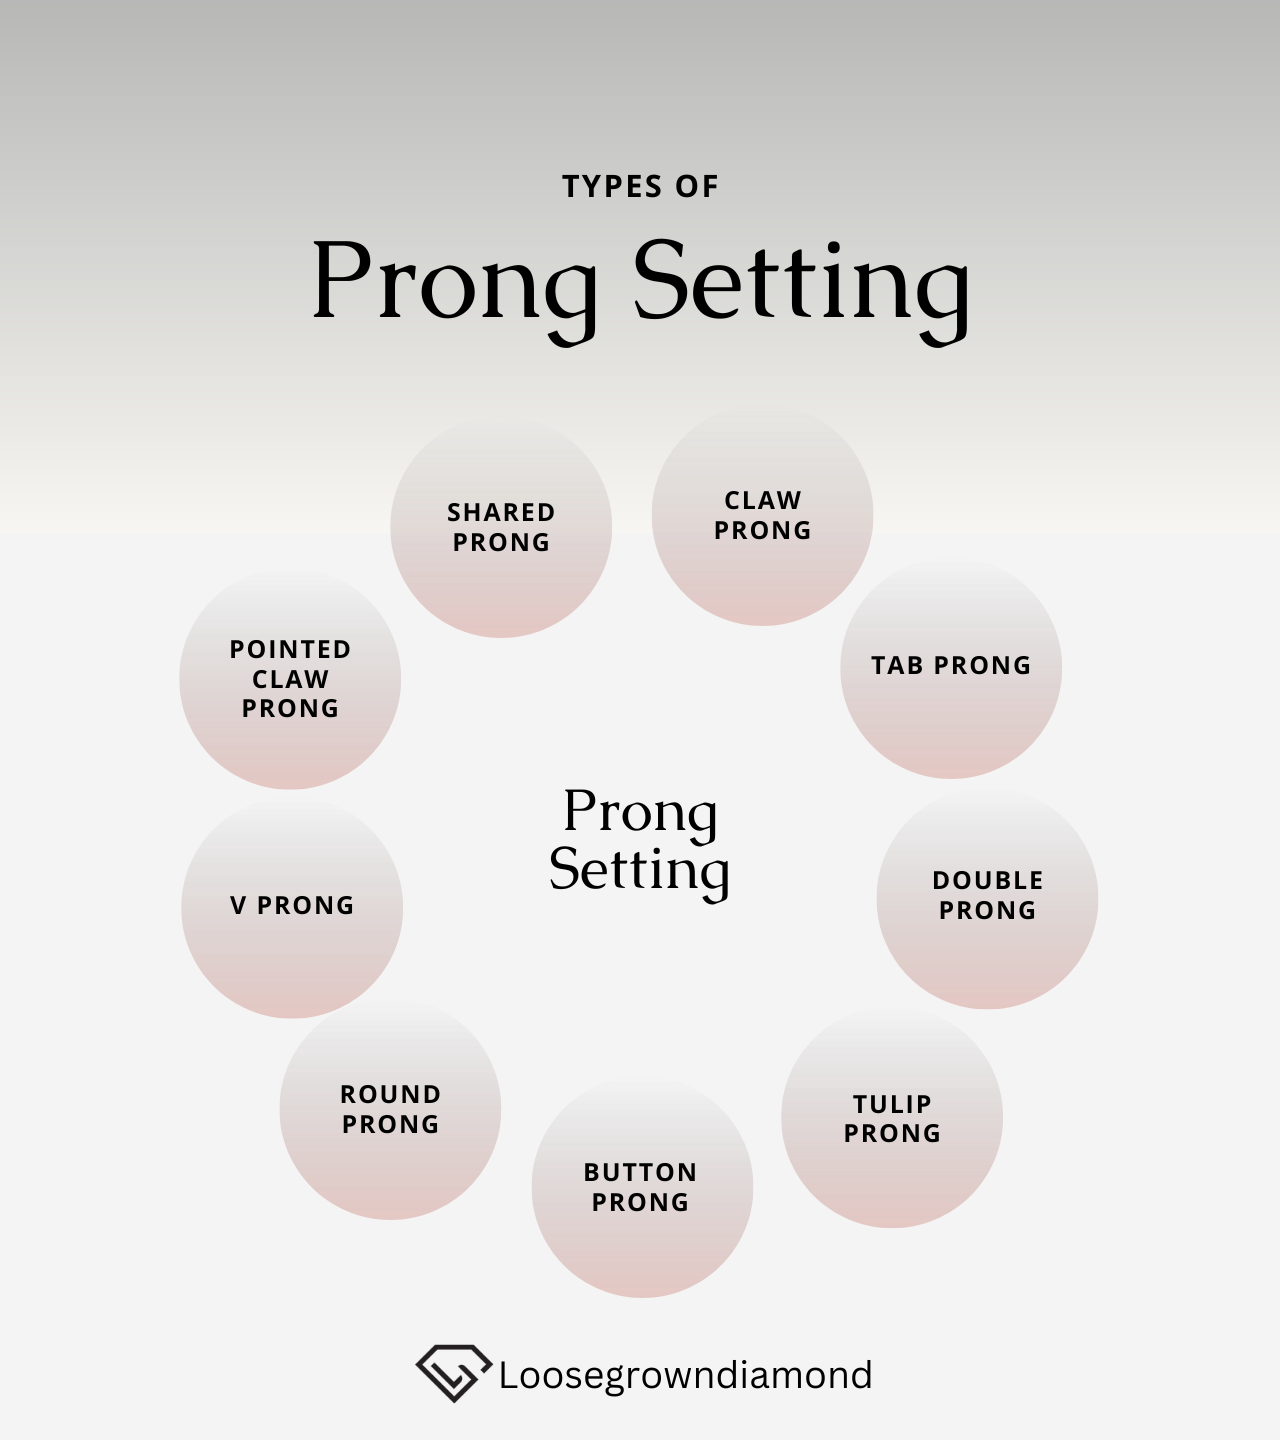 types of prong setting- Shared prong, Pointed Claw Prong, V prong, Round Prong, Button Prong, Tulip prong, Double Prong, Tab Prong, Claw Prong